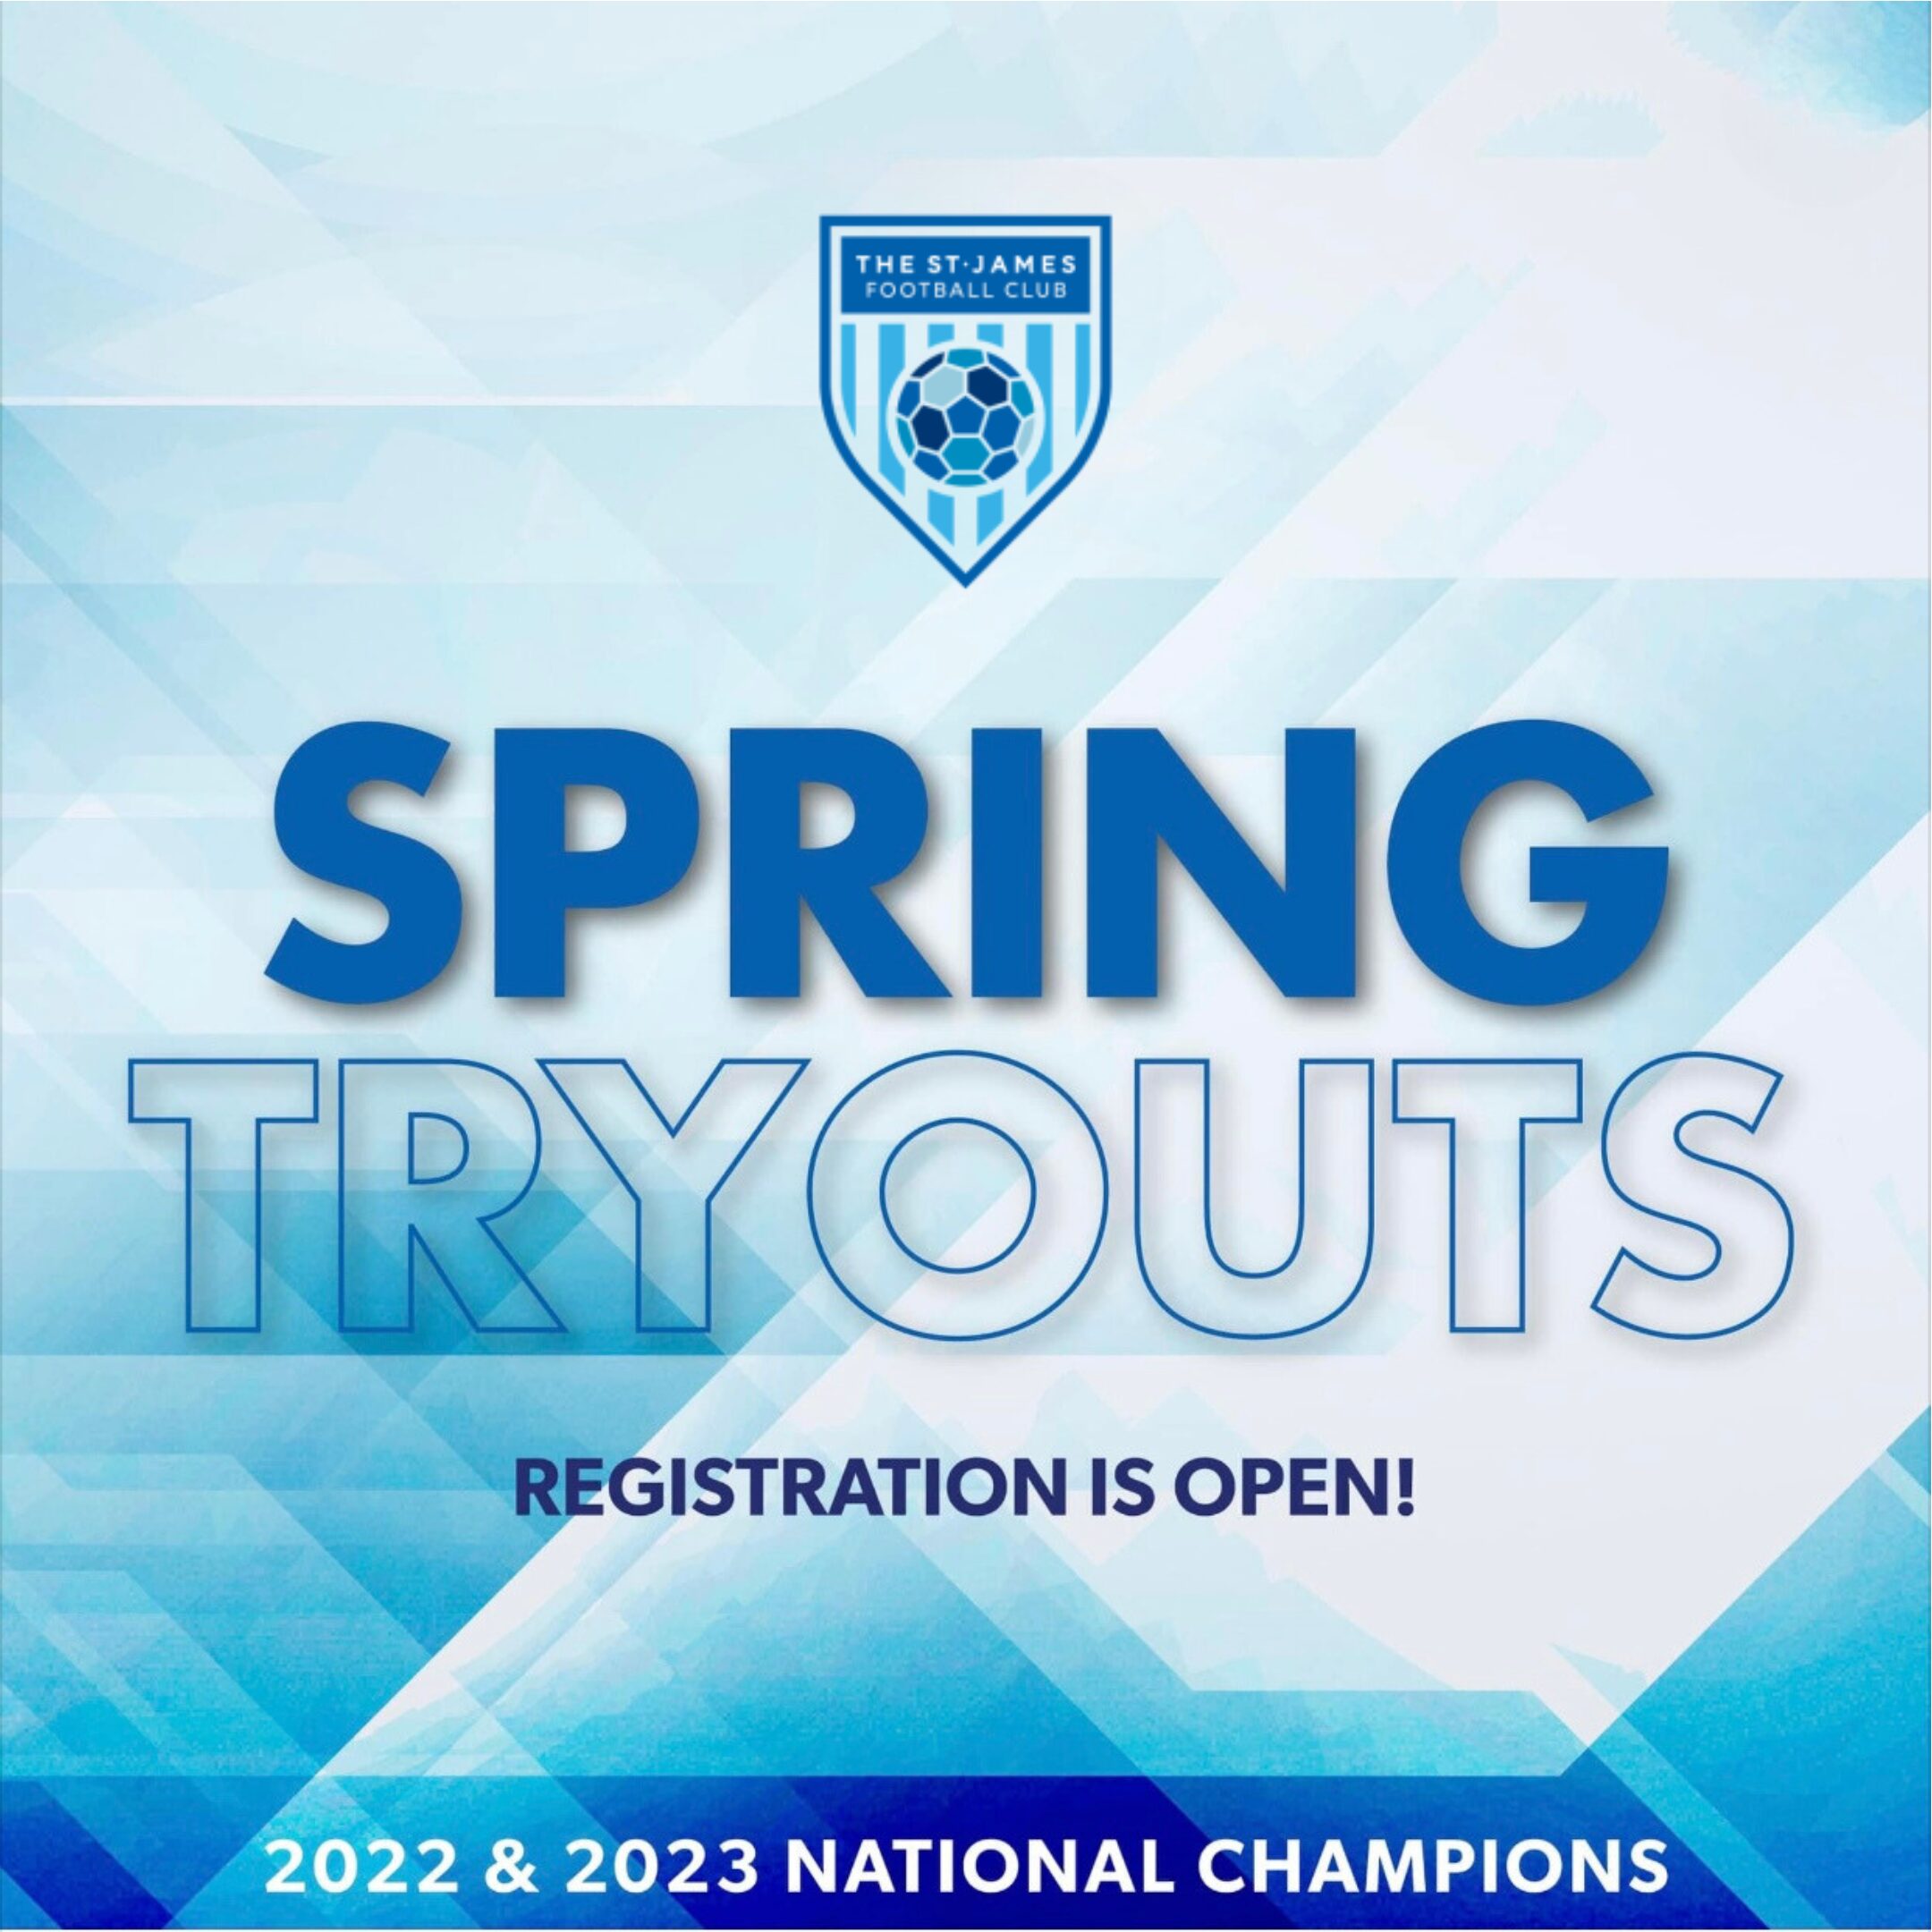 Spring tryouts